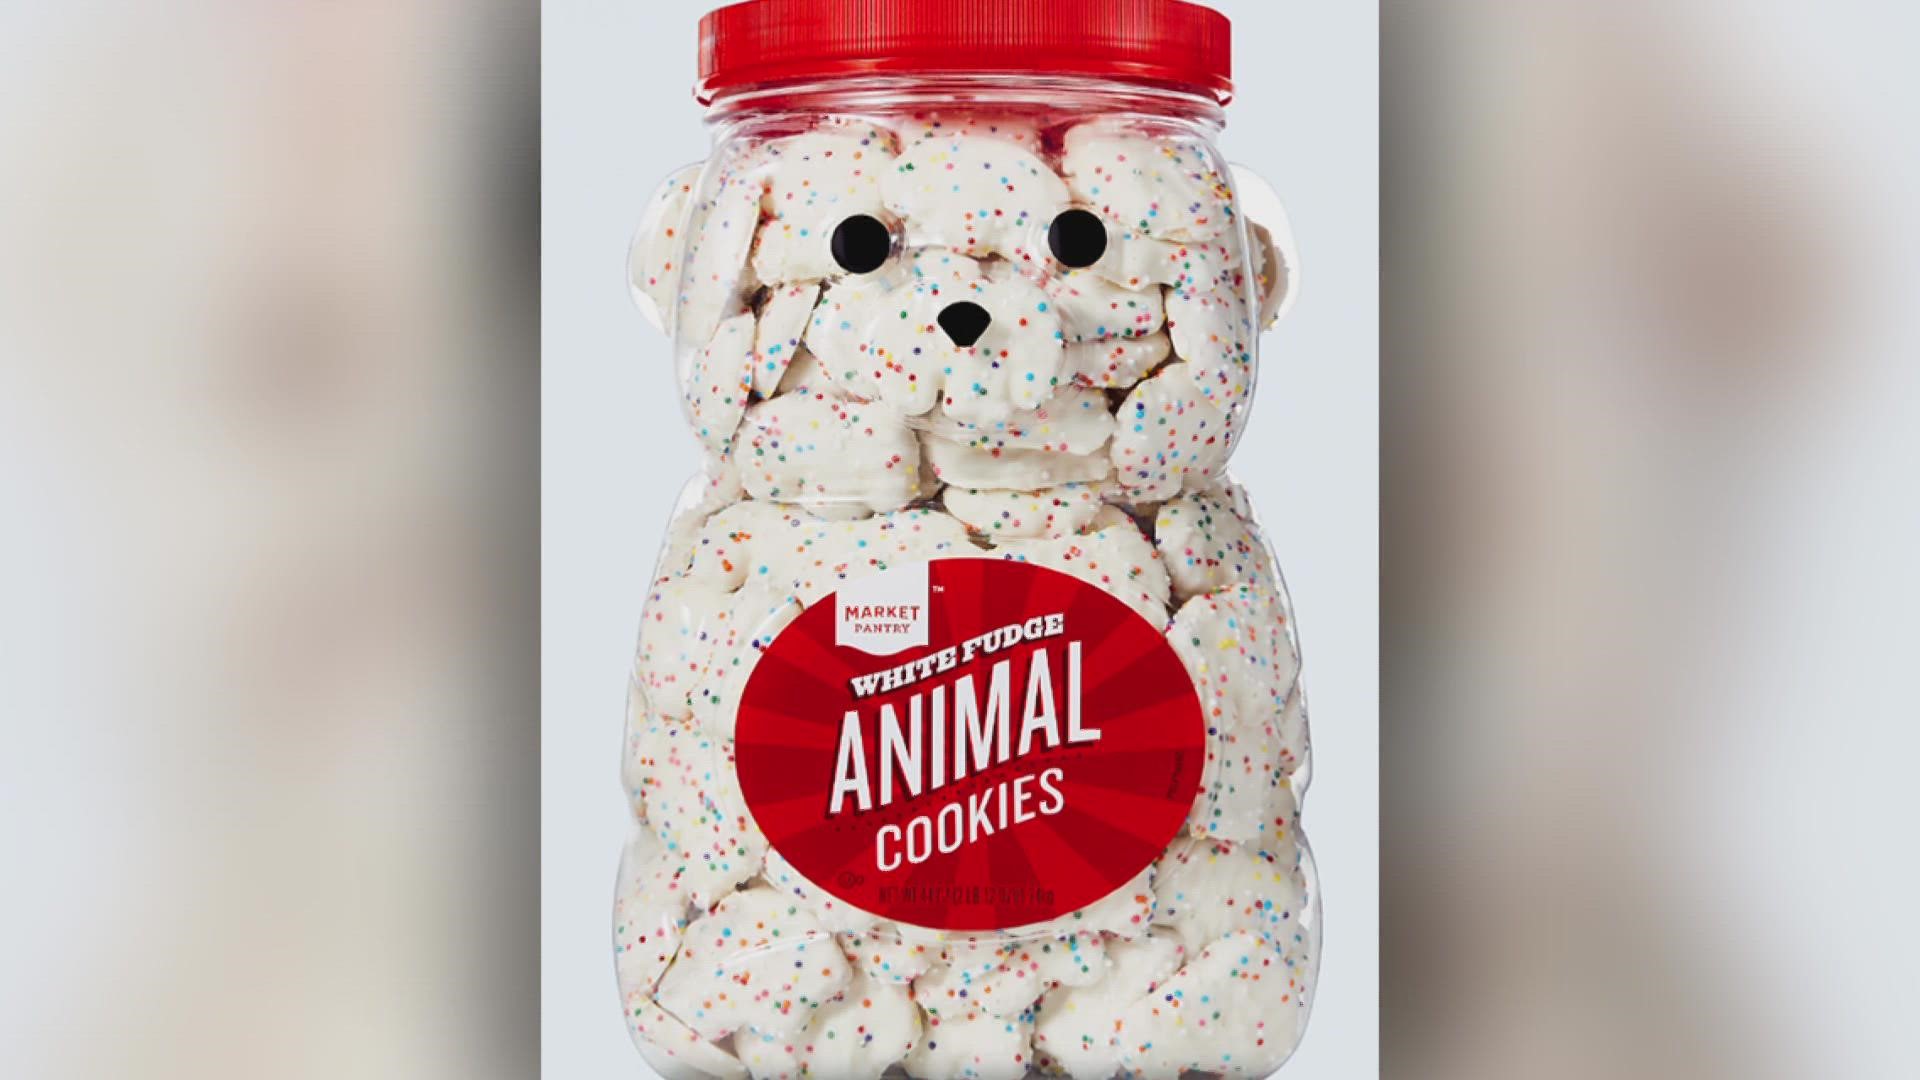 The U.S. Food and Drug Administration has recalled Target's brand of White Fudge Animal Cookies because they "may contain metal".